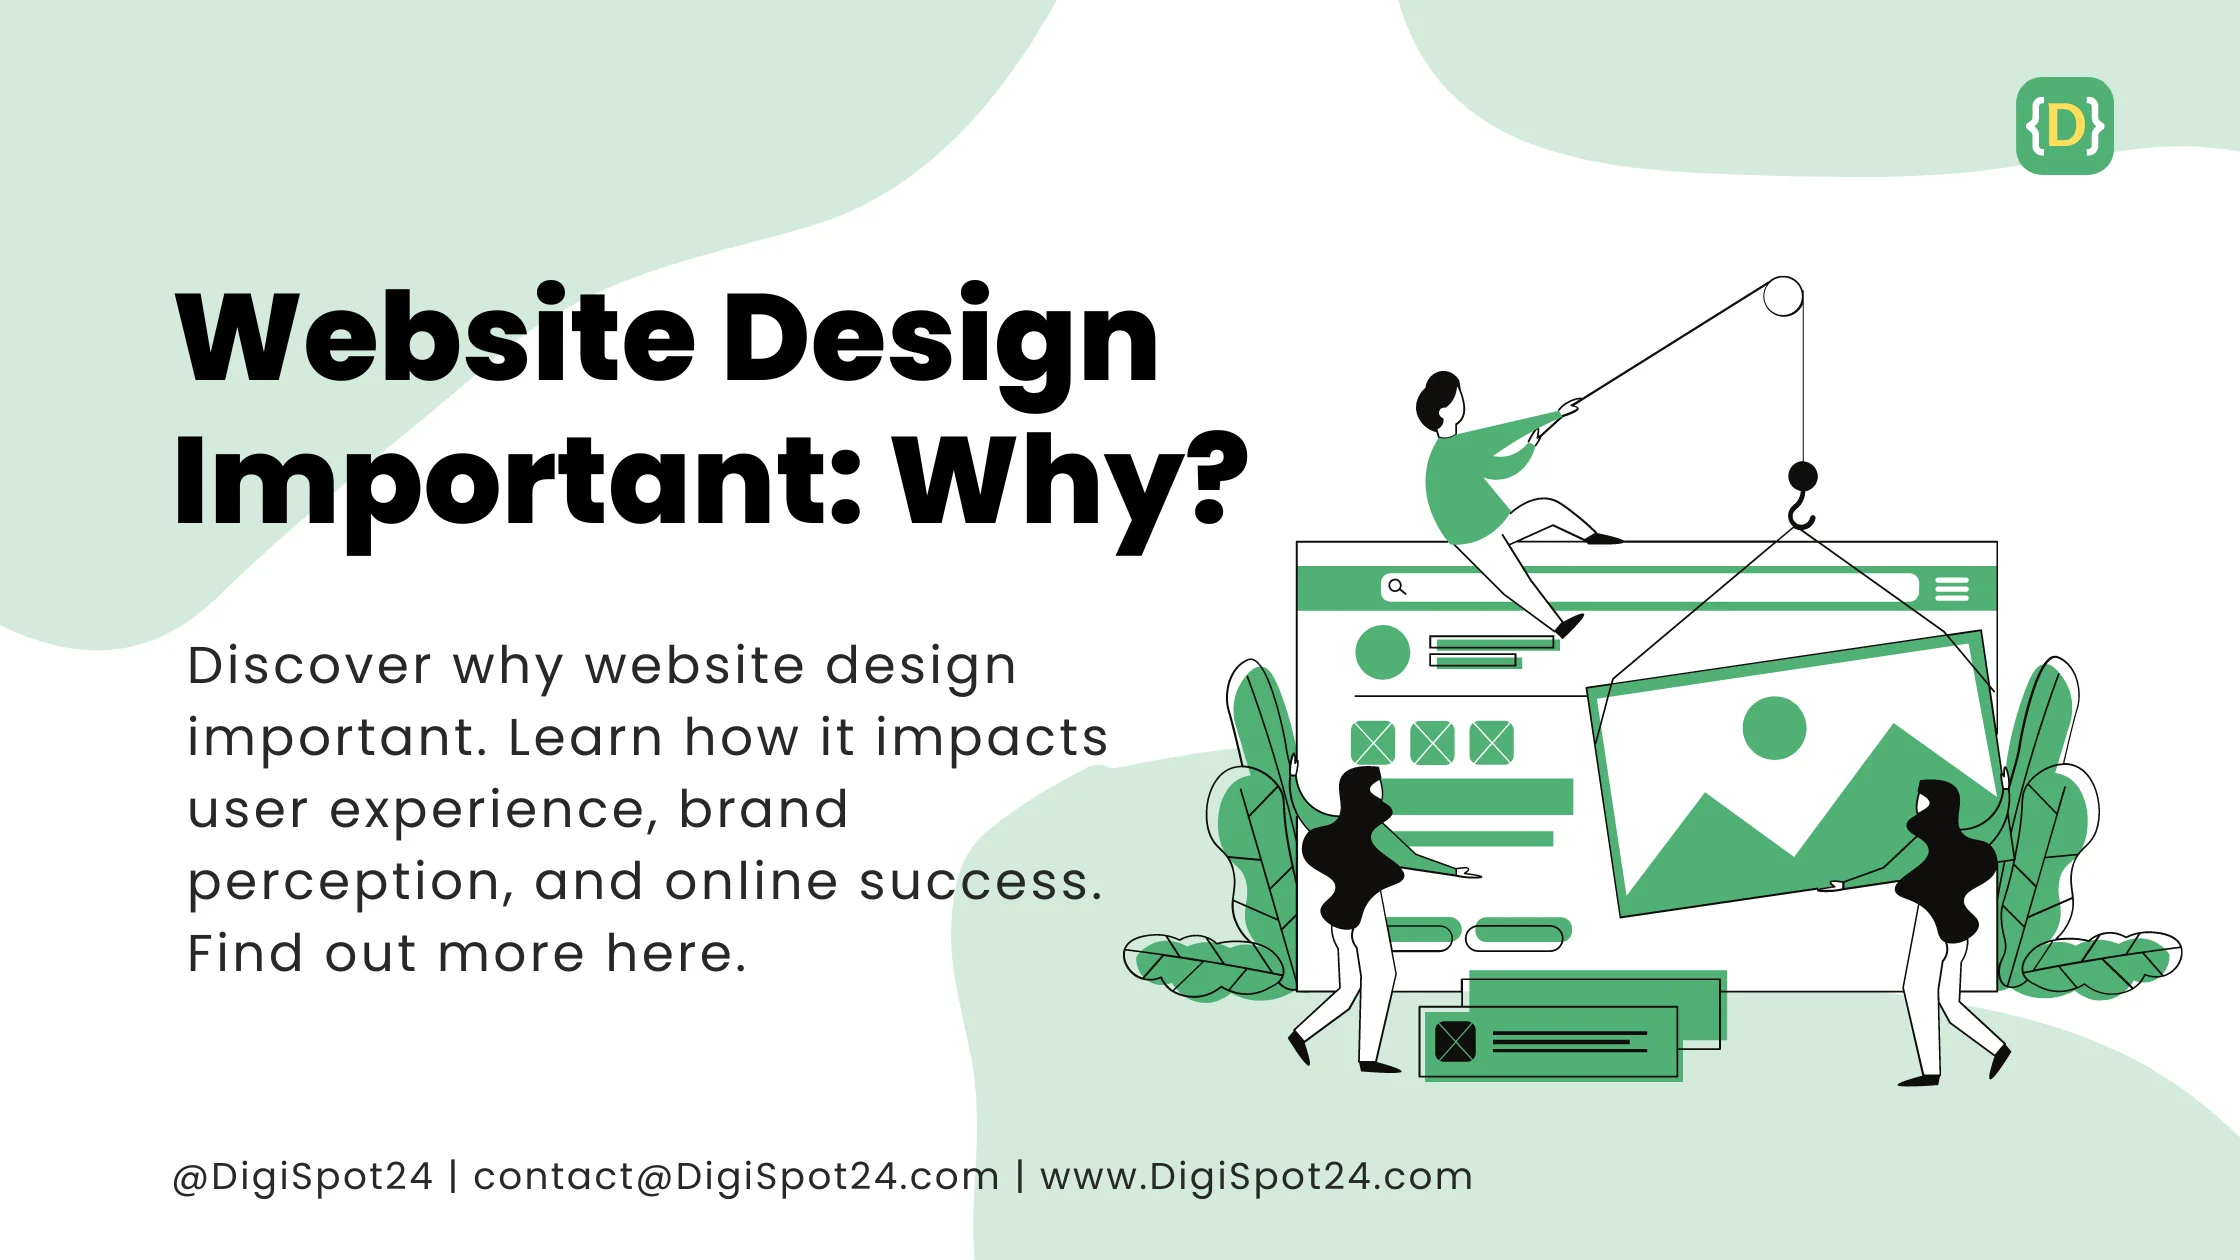 Website Design Important: Why?